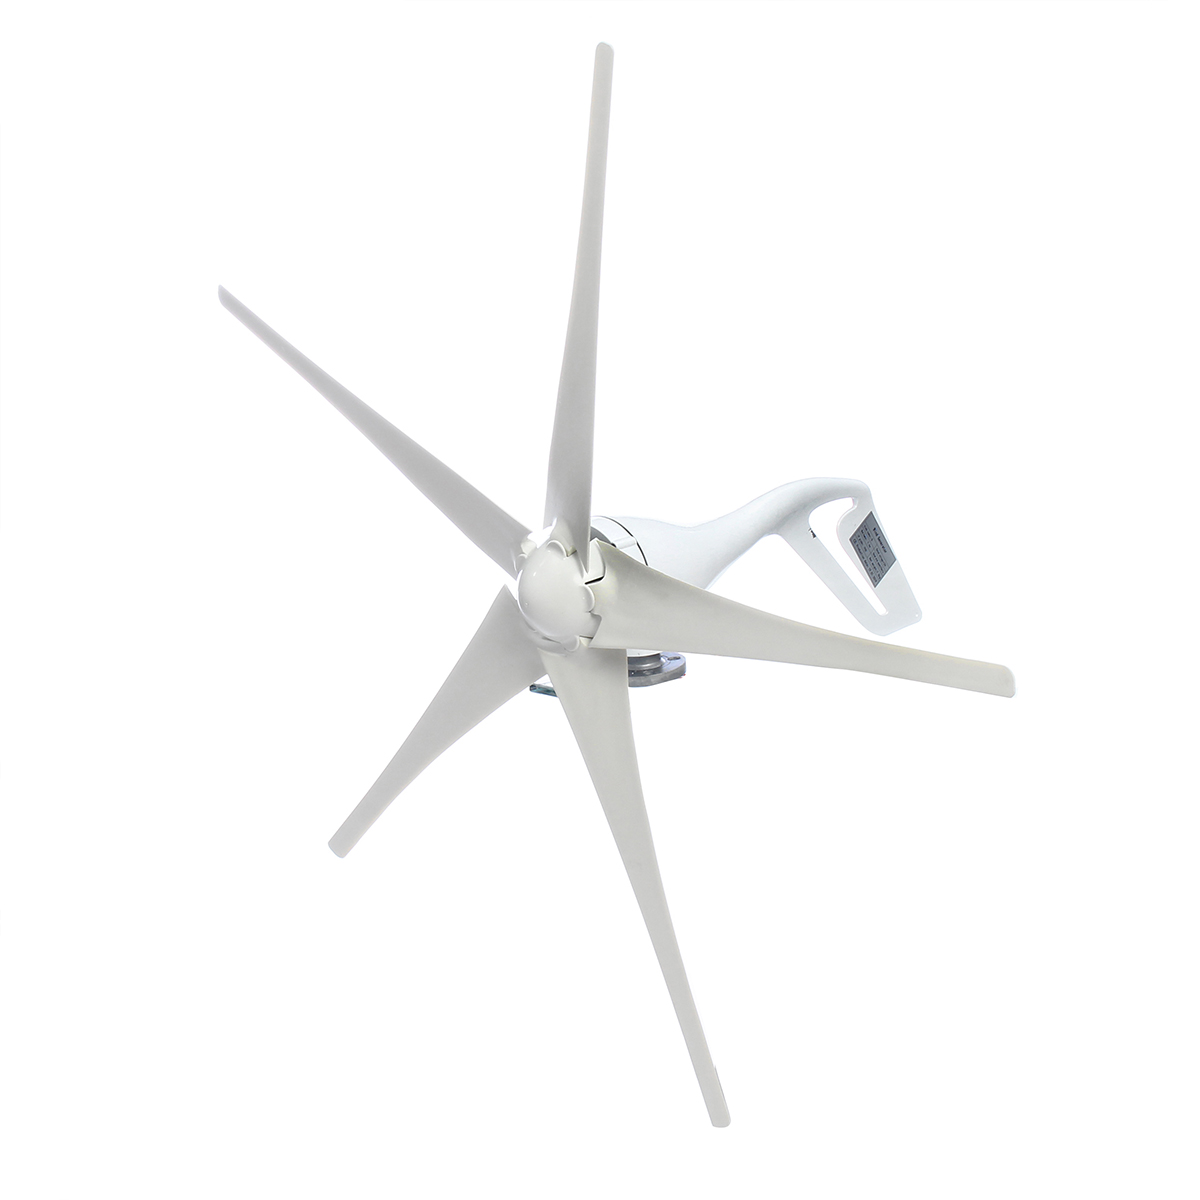 

400W 12V/24V 5 Blades Miniature Wind Turbine Residential Home Power Generator With Controller Wind Generator Kit